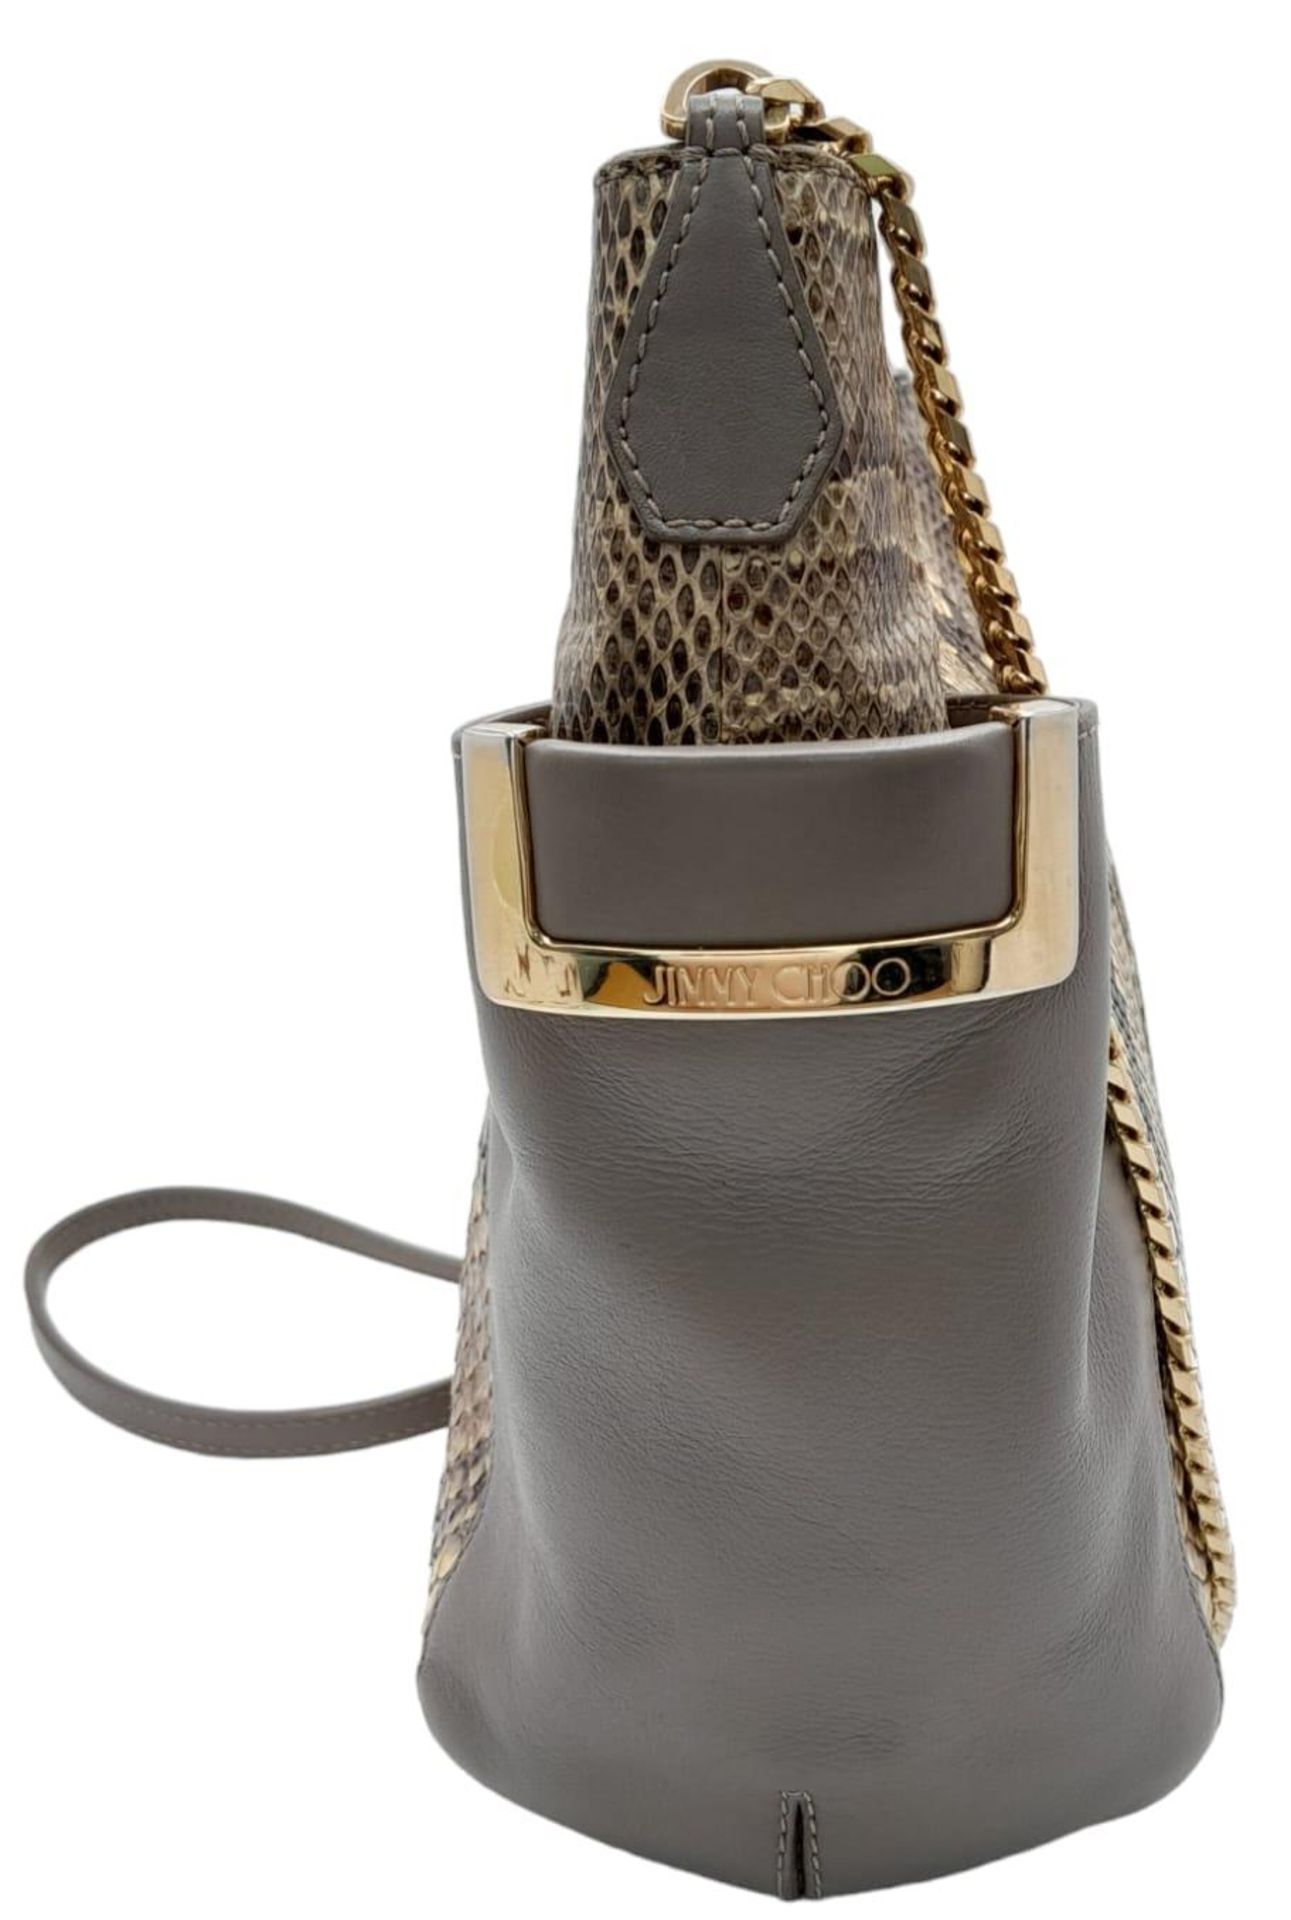 A Jimmy Choo Taupe Snakeskin Crossbody Bag. Snakeskin and leather exterior with gold-toned hardware, - Bild 2 aus 7